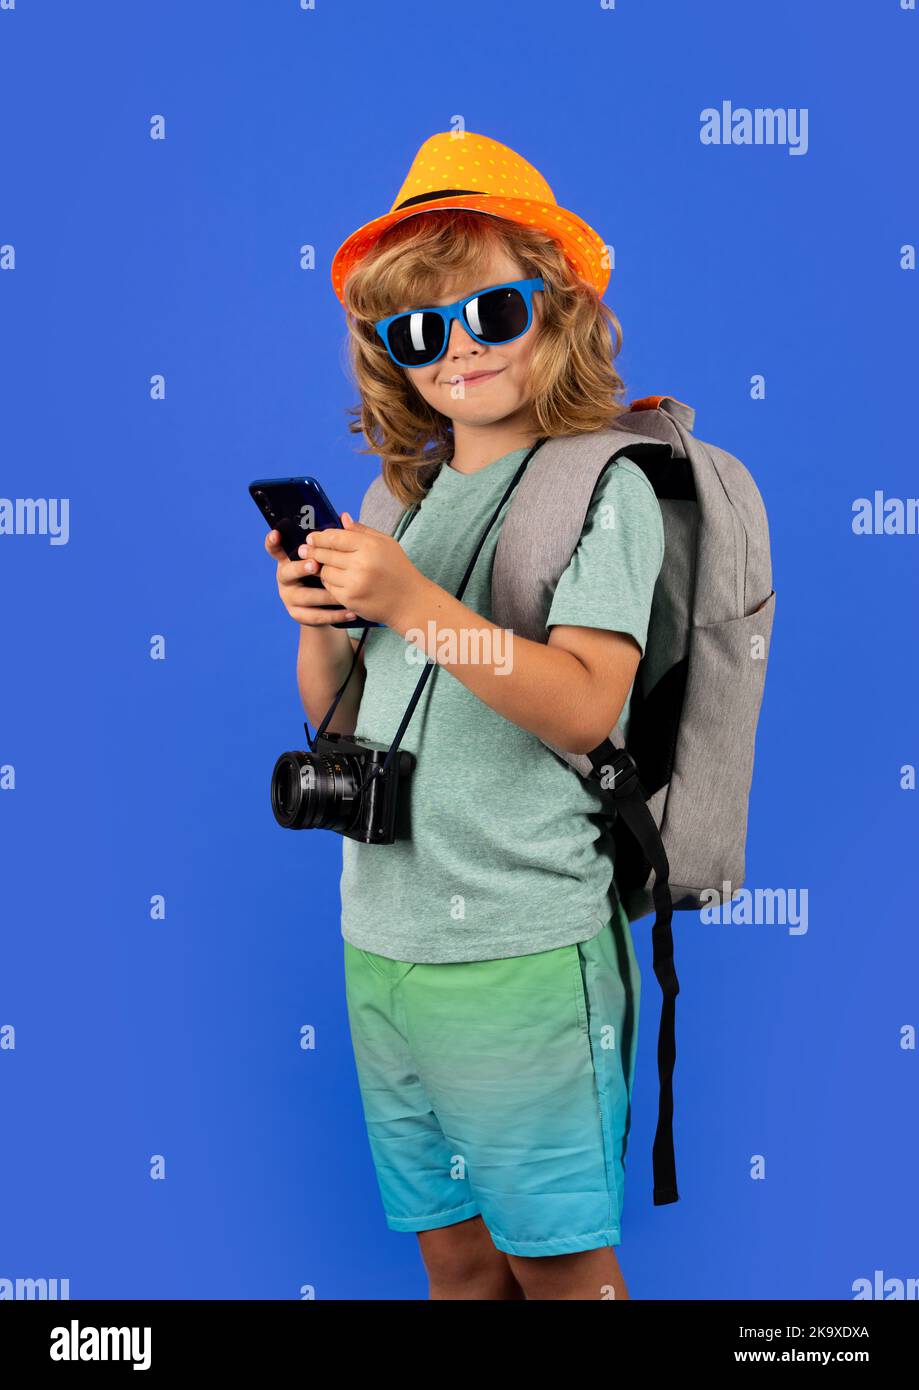 Traveler tourist kid boy 7-8 years old. Kid boy with mobile phone. Stock Photo